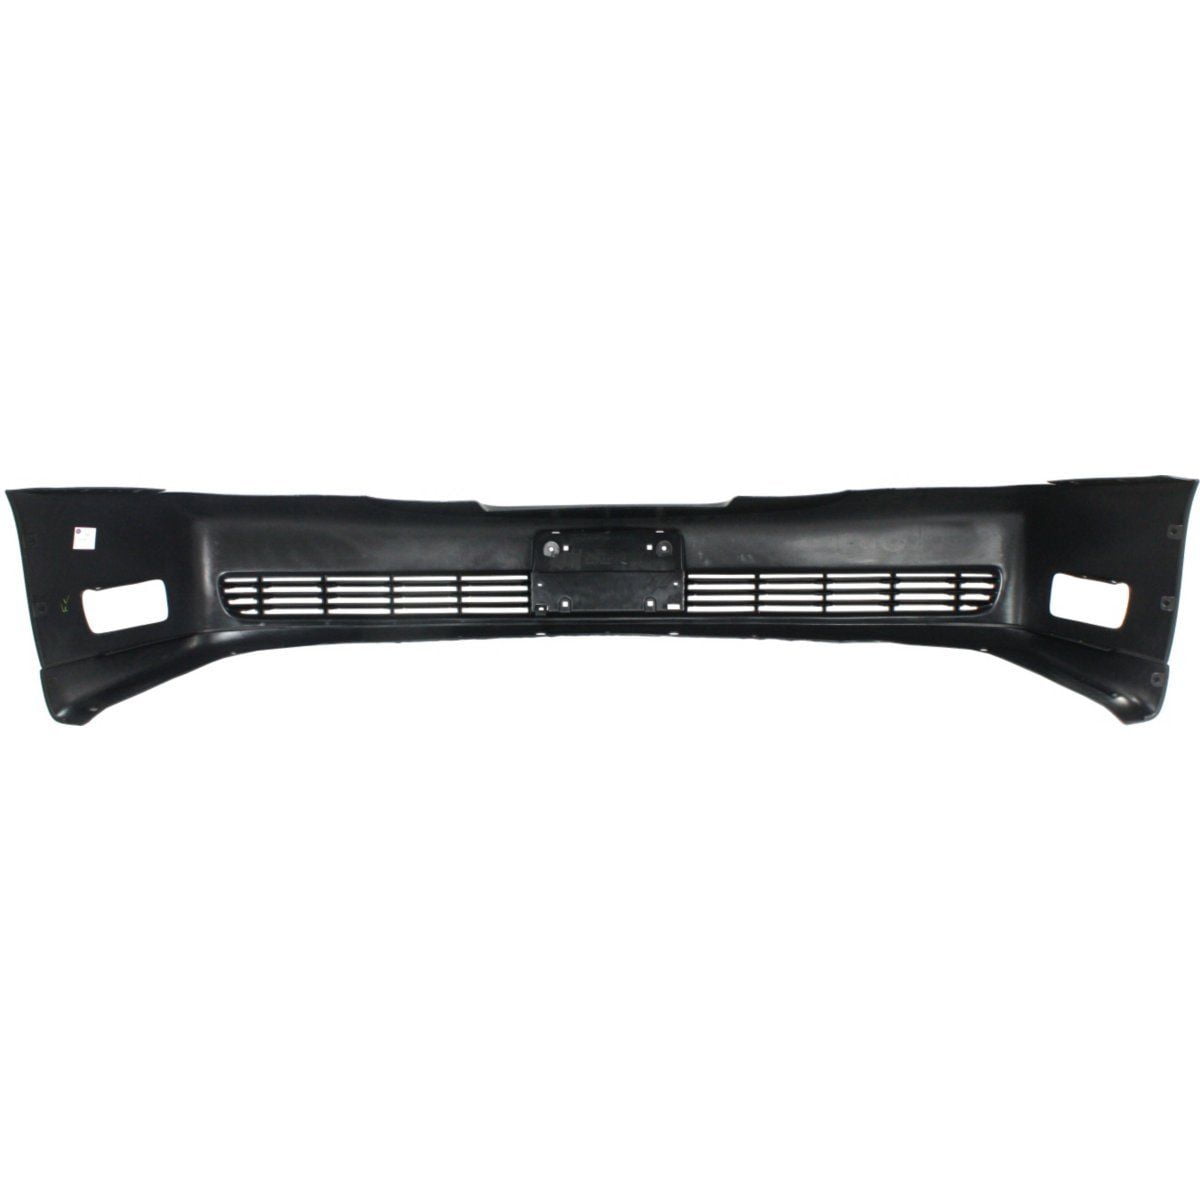 NEW FRONT BUMPER COVER PRIMED FITS 2000-2005 CADILLAC DEVILLE GM1000610